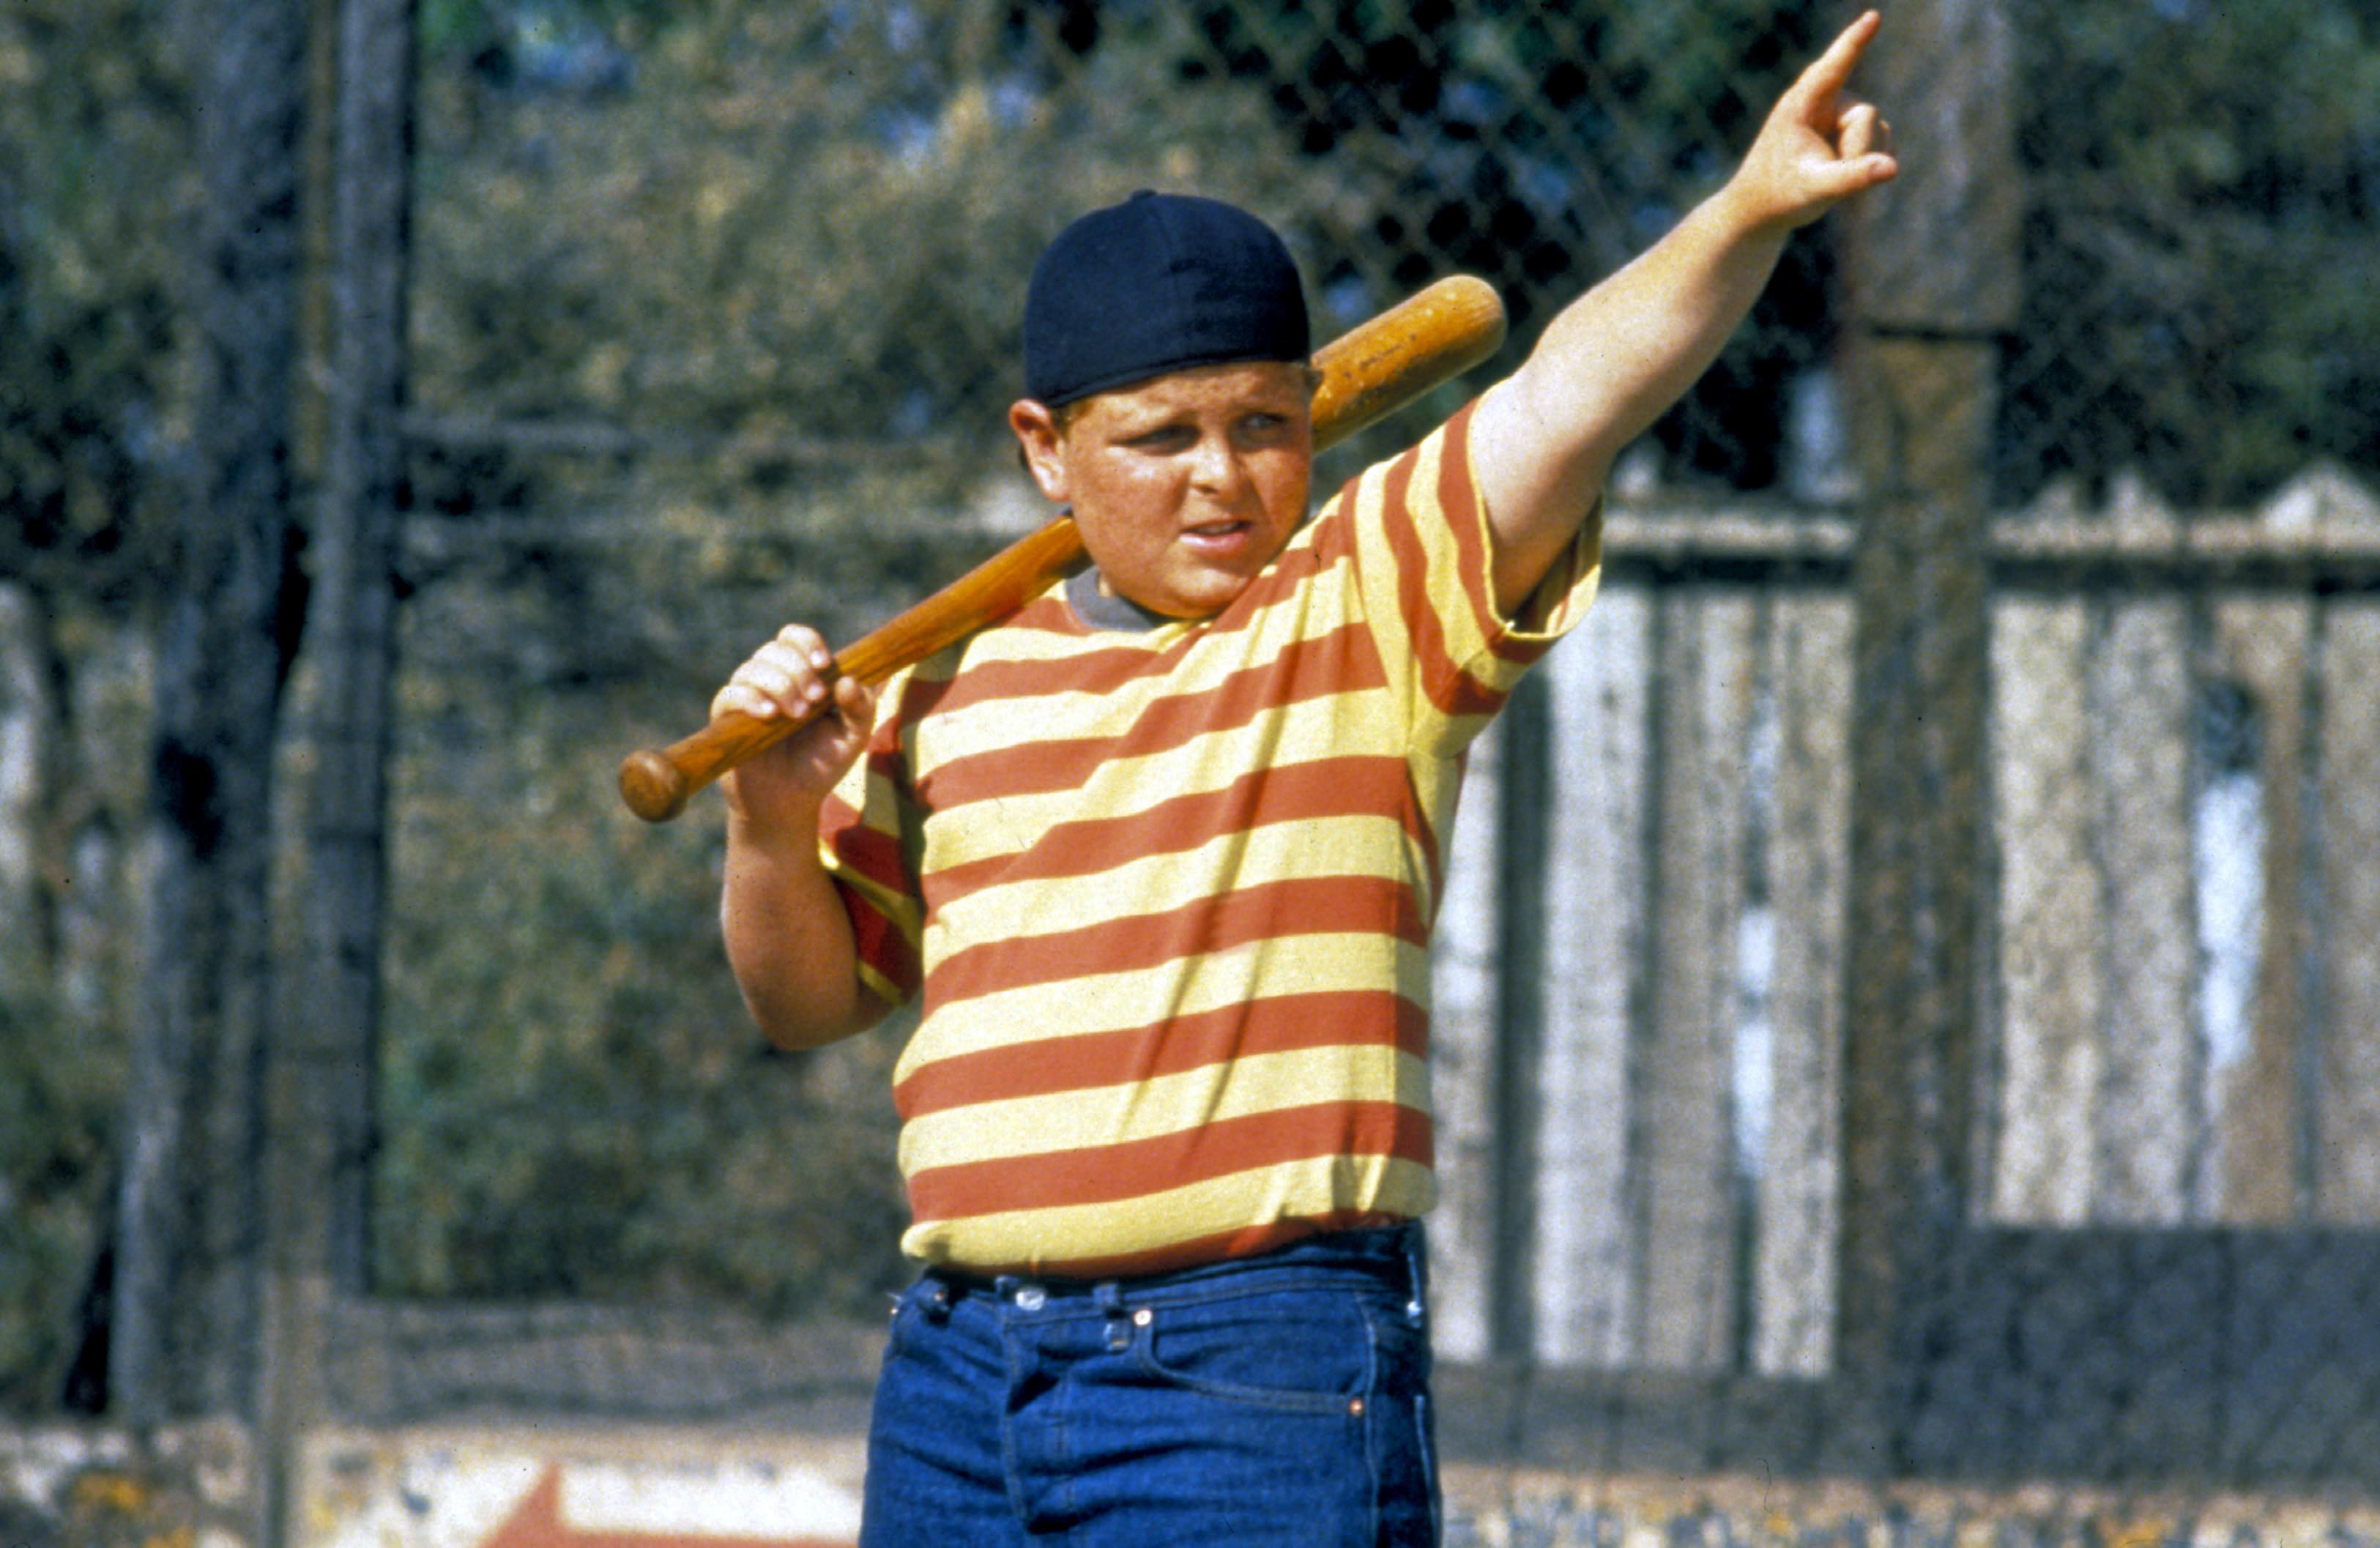 Patrick Renna getting ready to play baseball in a striped shirt during a scene in The Sandlot